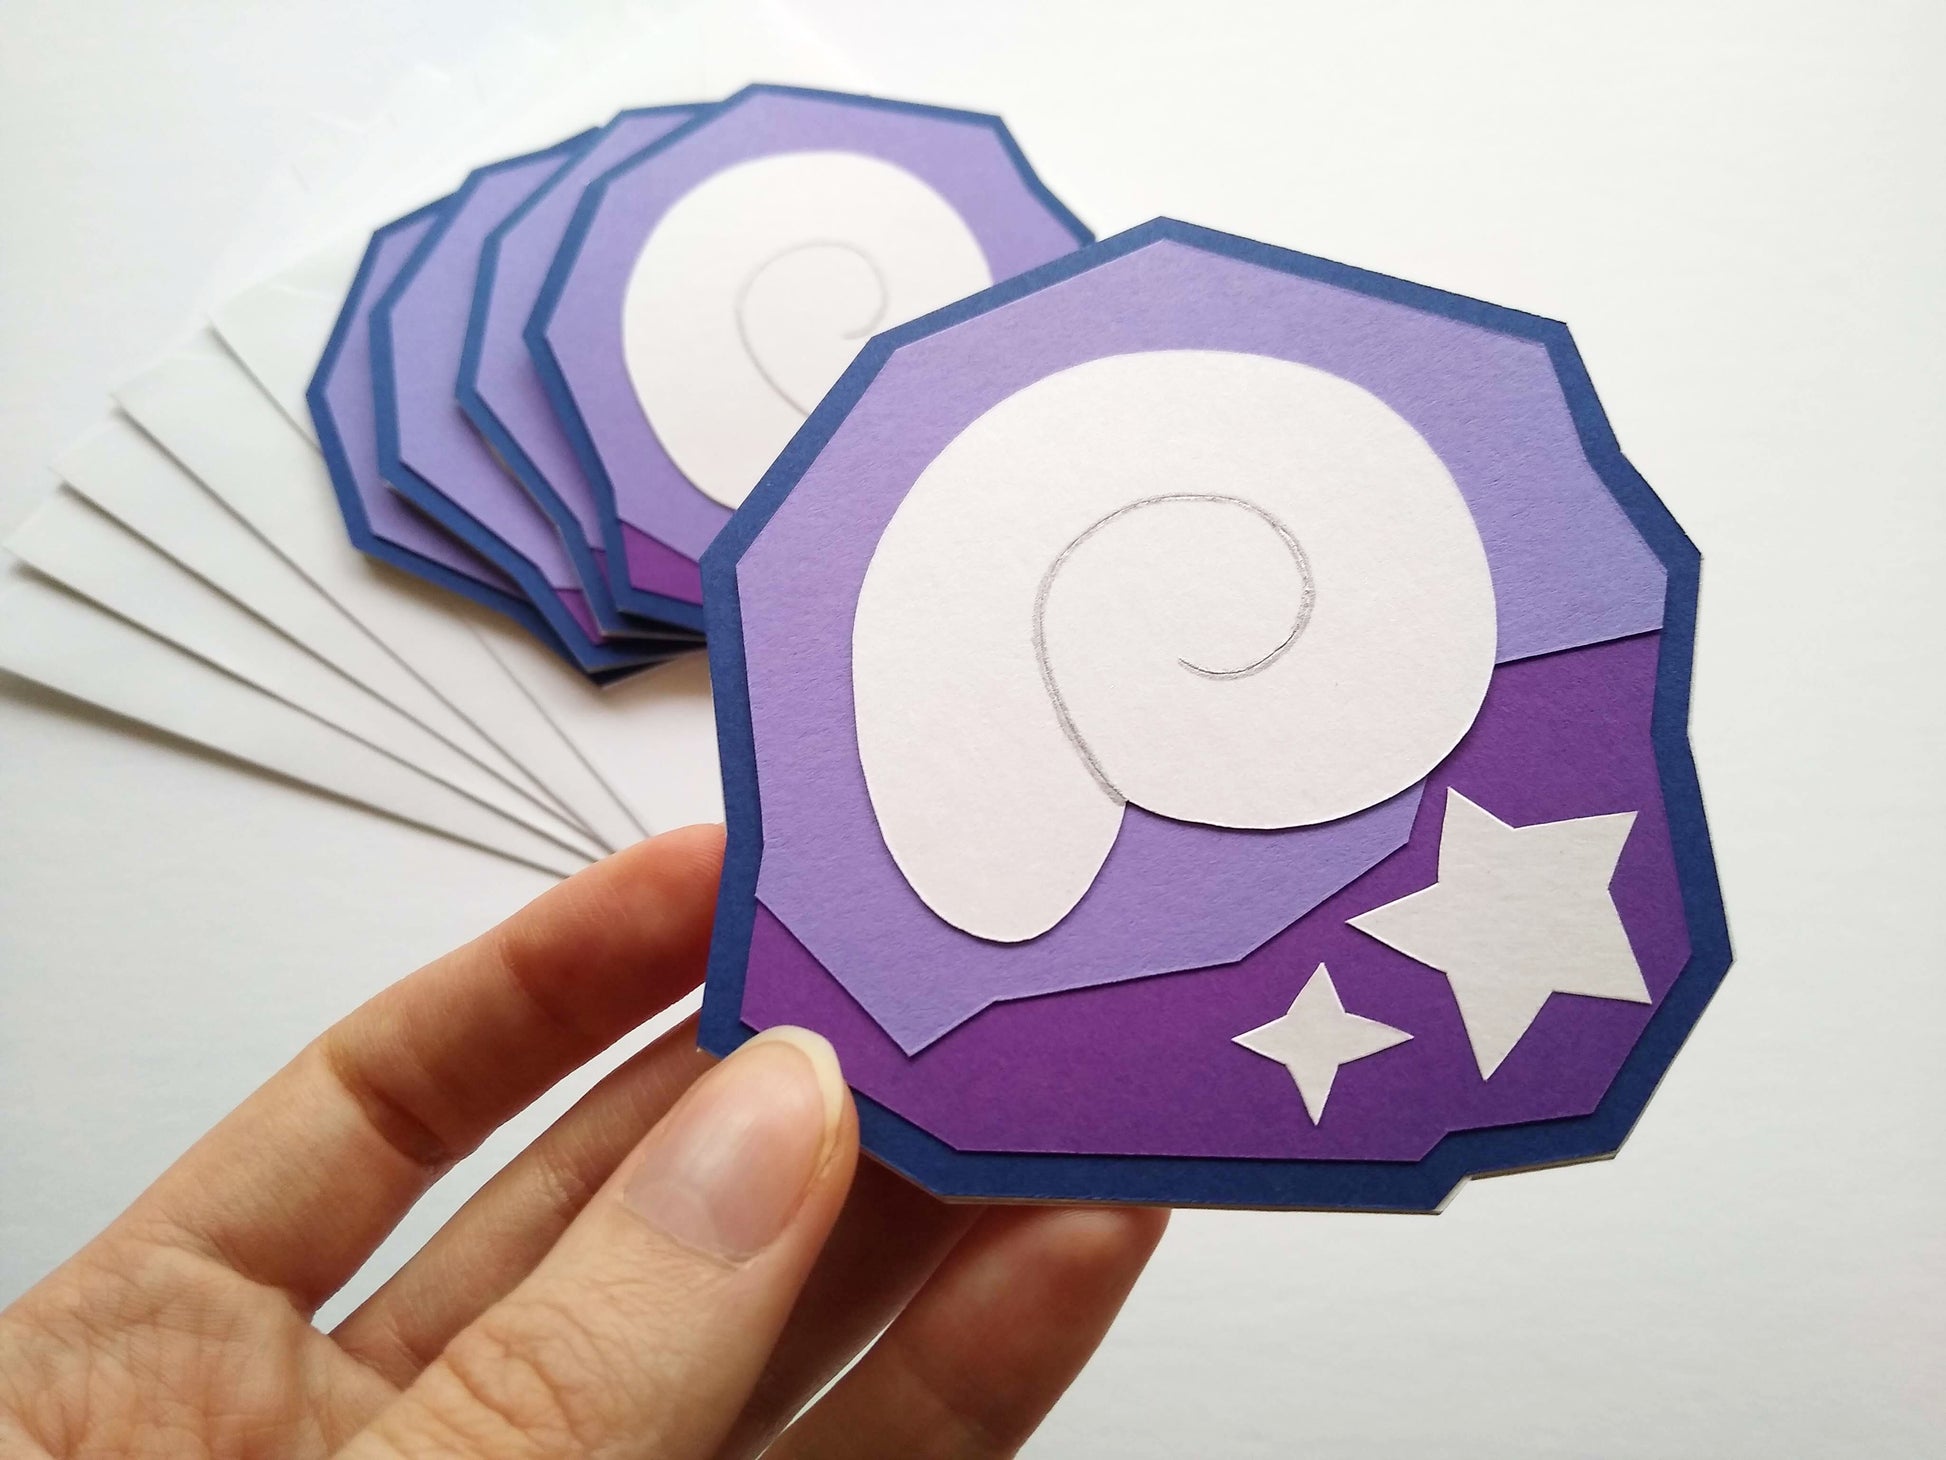 In the foreground is a hand holding a single card to the camera. The card is designed to look like a shell and two stars stuck inside a purple rock, like fossils. Four fossil cards are stacked on white envelopes in the background.